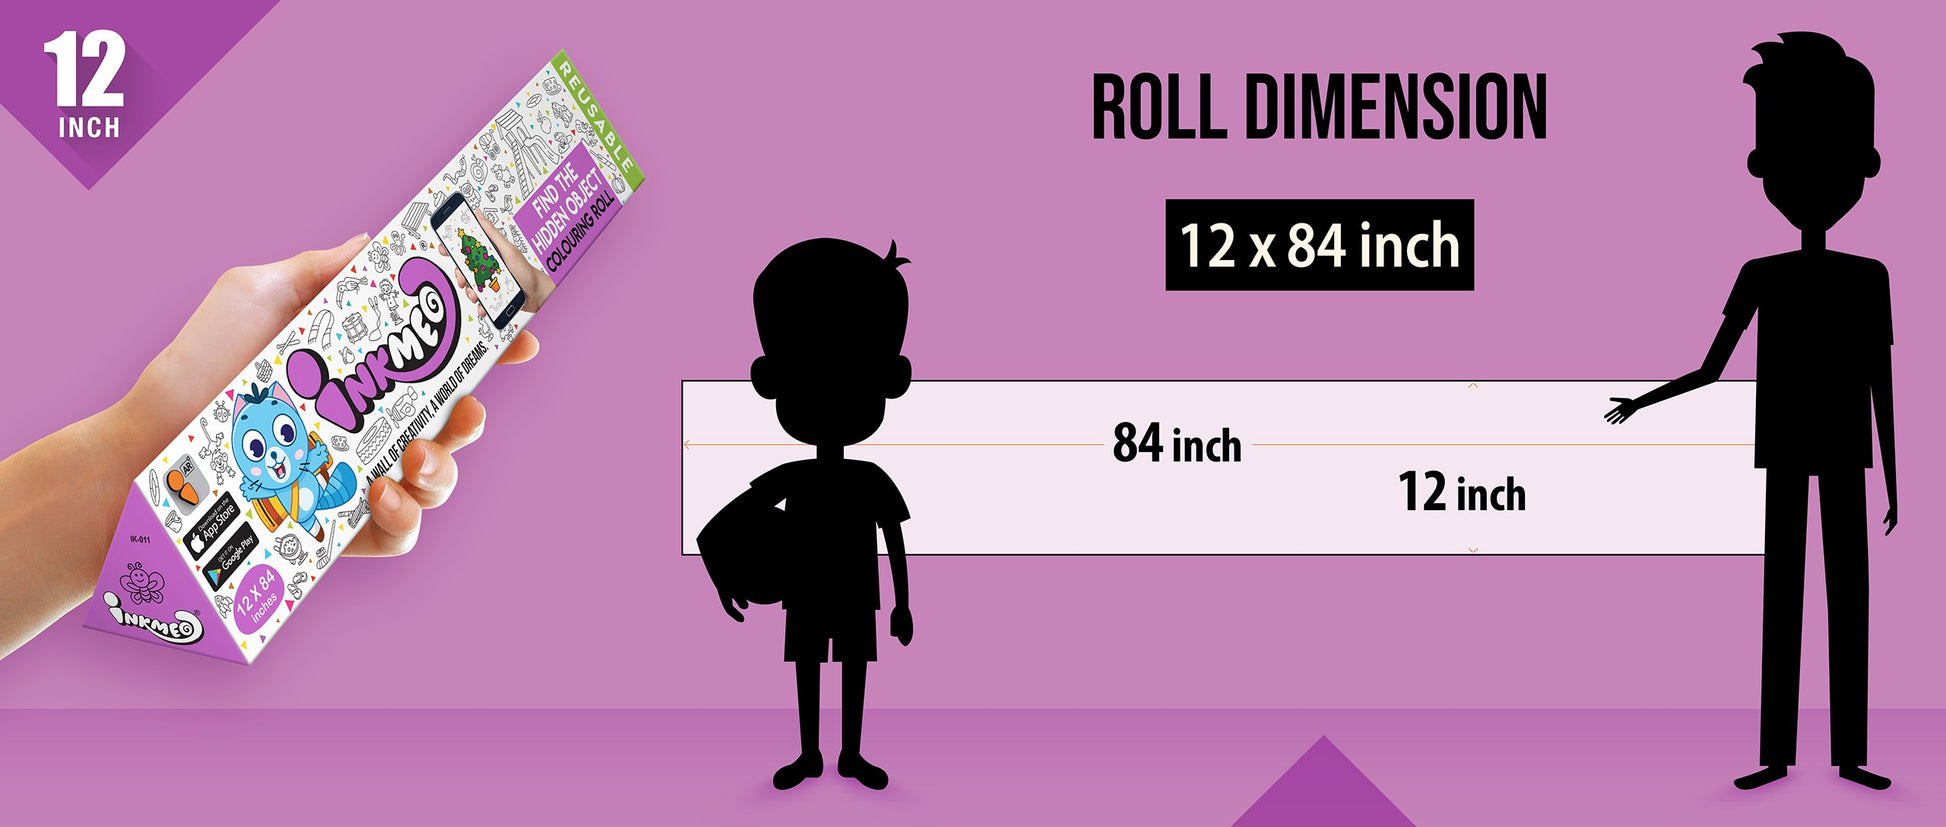 The image shows a purple background with a ruler indicating child and adult height on an 12*84 inch paper roll dimension.